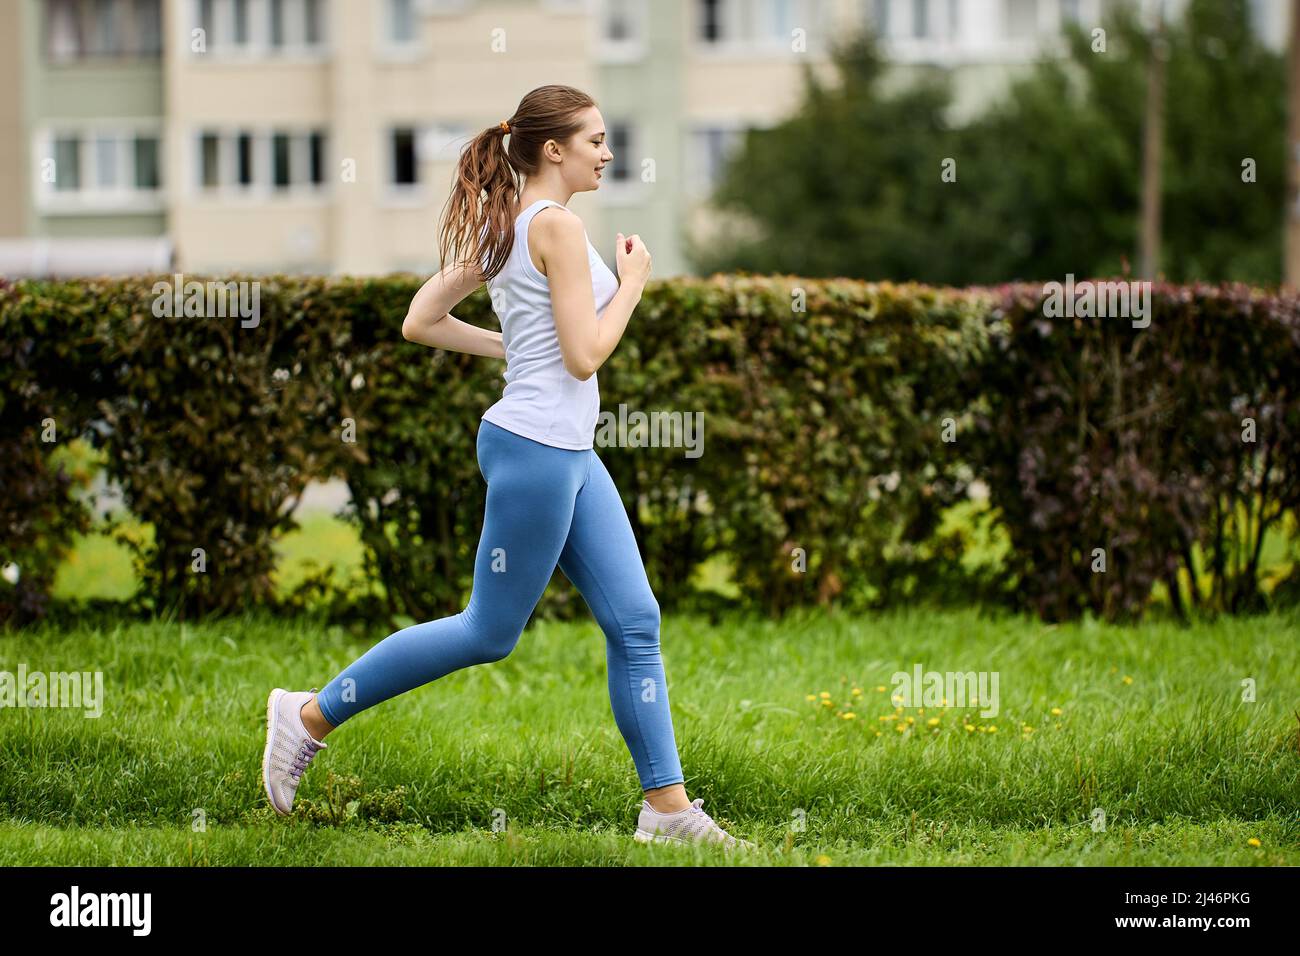 Jogging in city park in summer by slender woman 29 years old in leggins as  training outdoors Stock Photo - Alamy